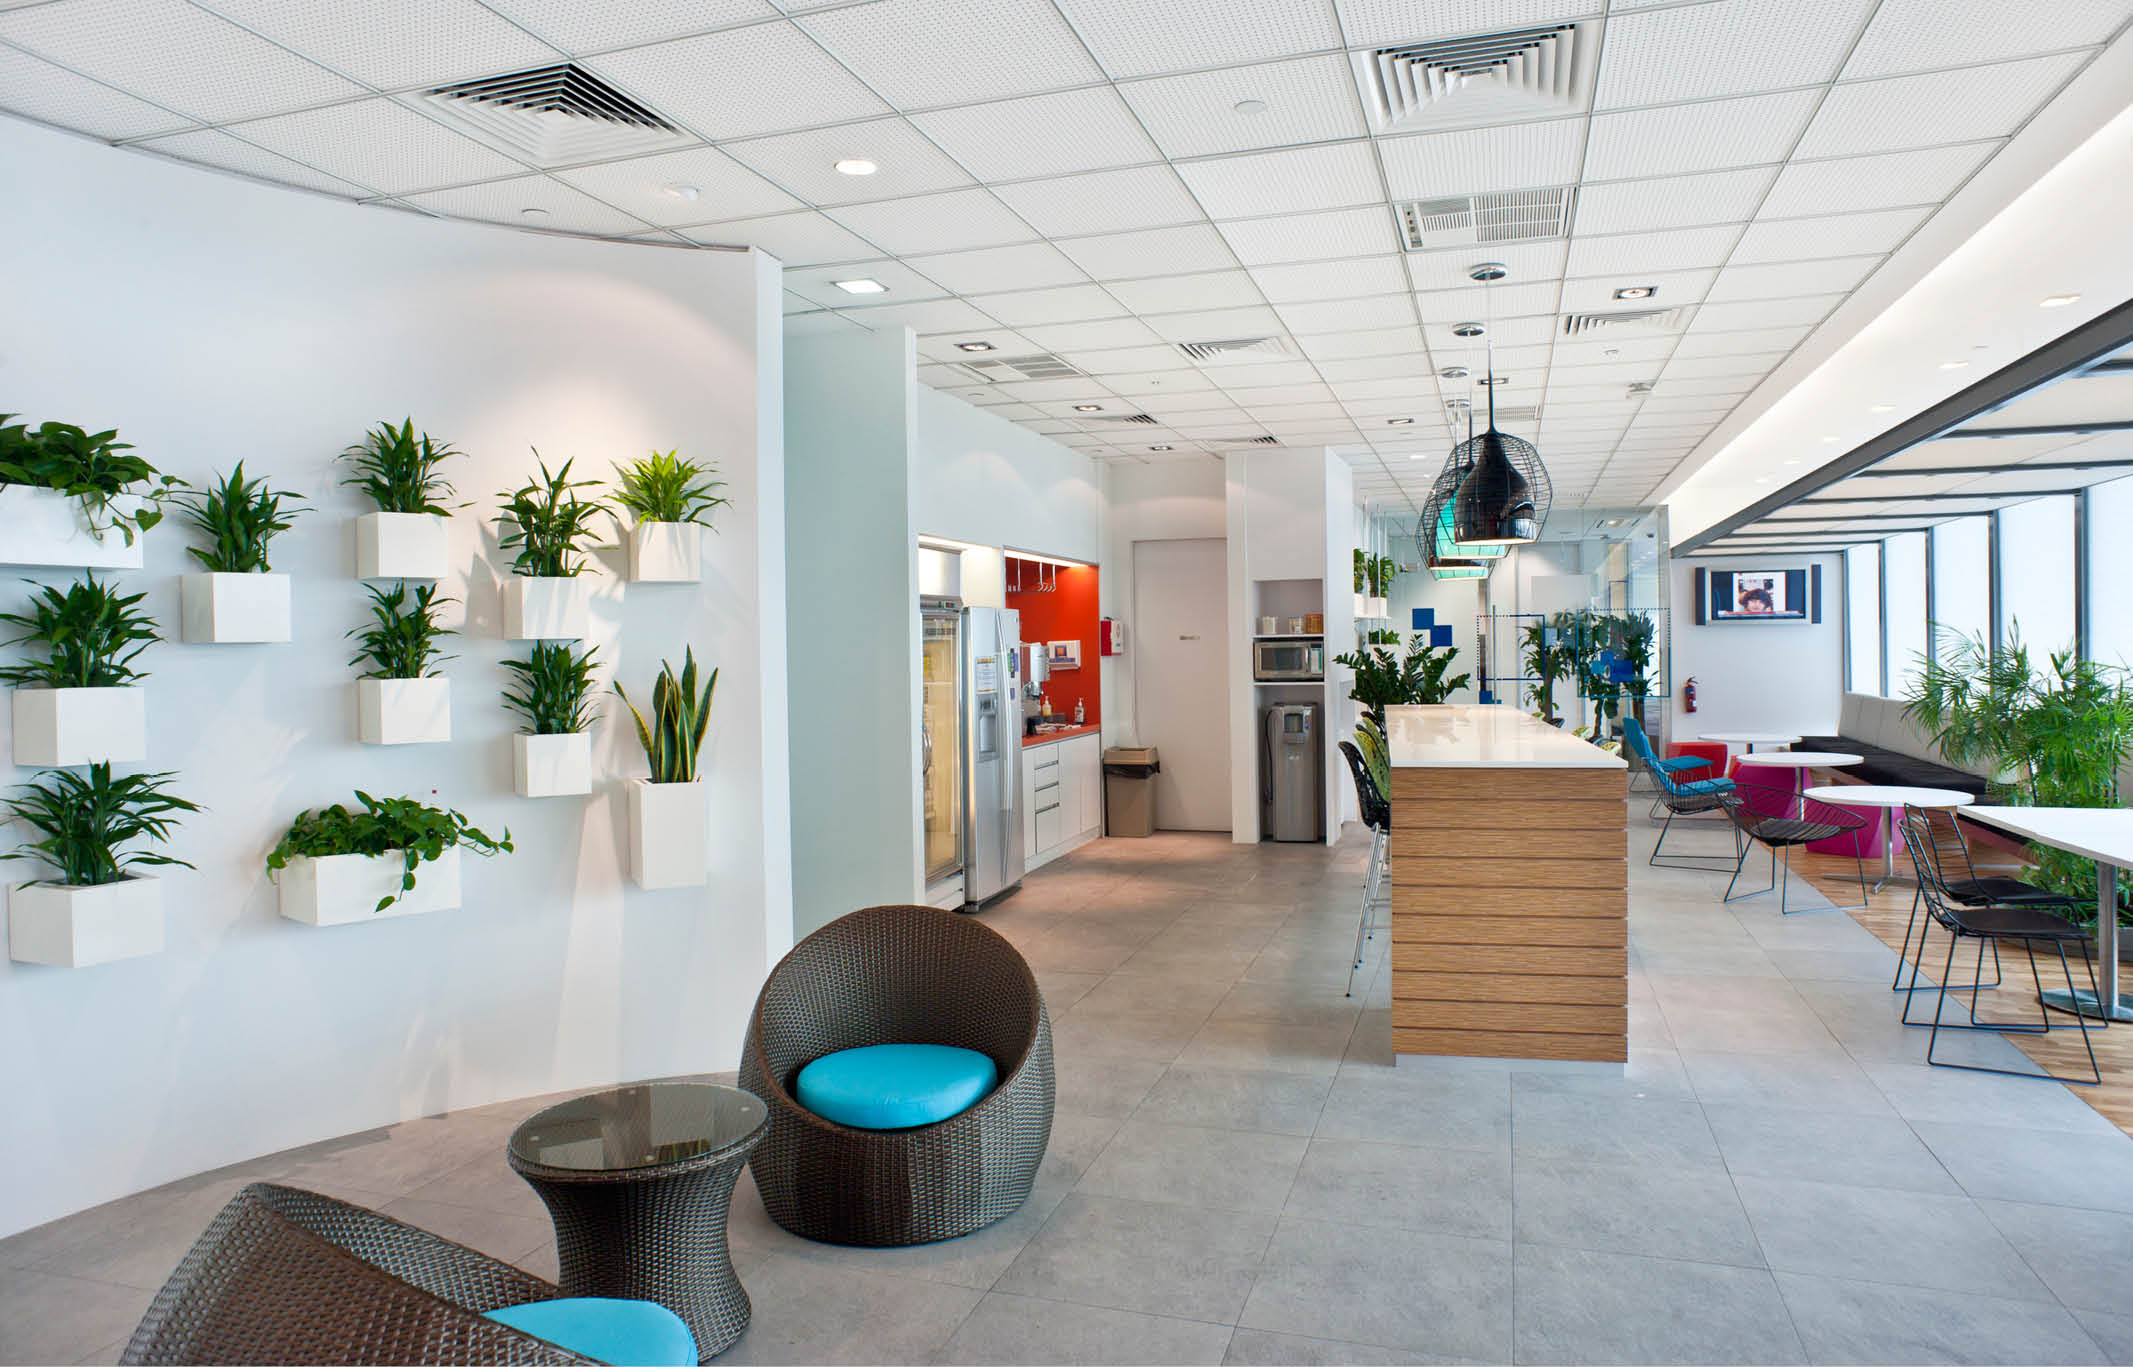 Tables and chairs and wall plant display at Microsoft office Singapore fit out by ISG Ltd